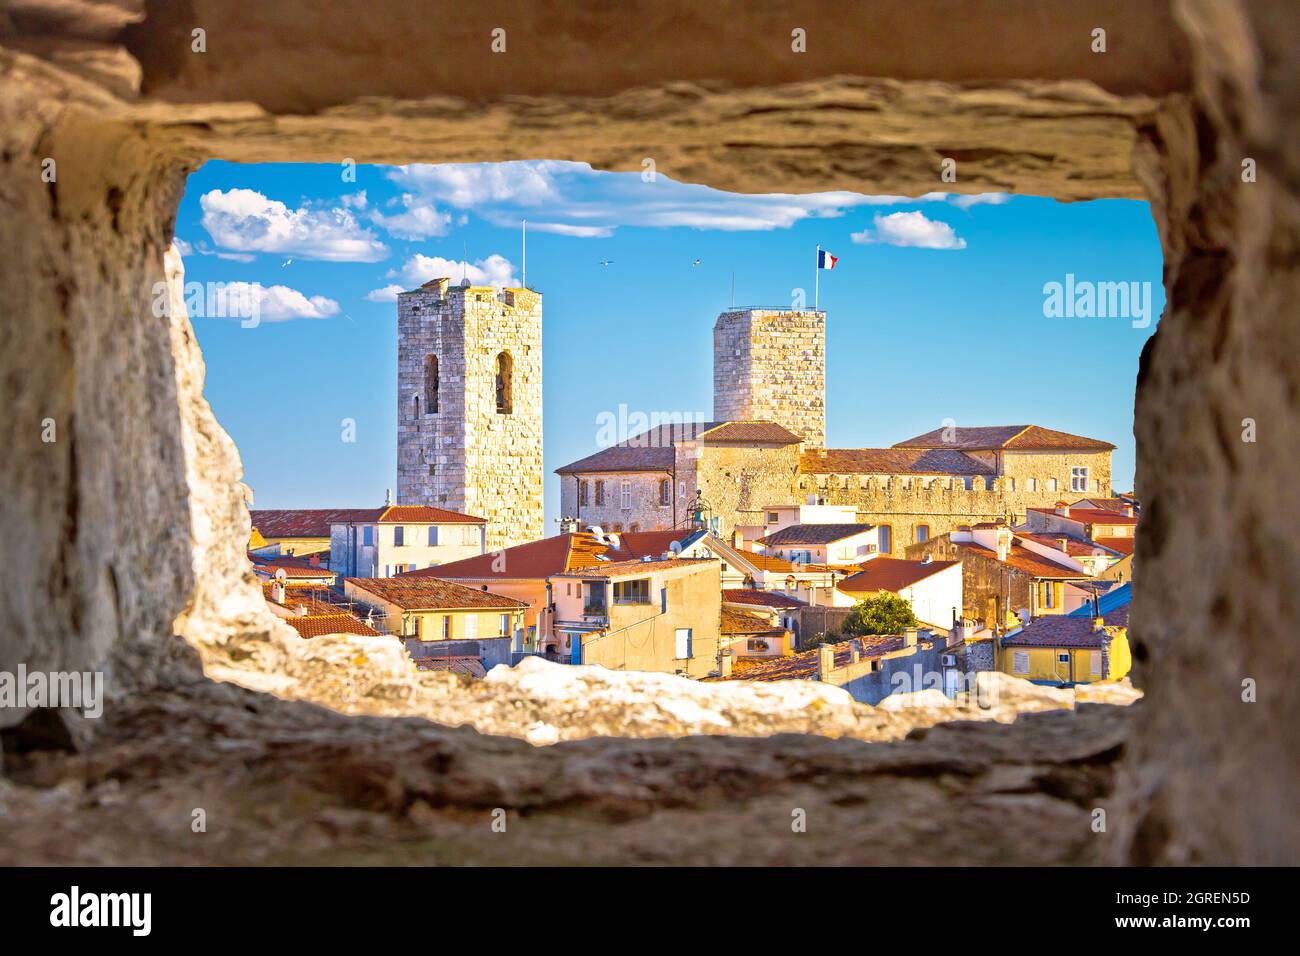 Historic French riviera old town of Antibes seafront and rooftops view through stone window, famous destination in Cote d Azur, France Stock Photo